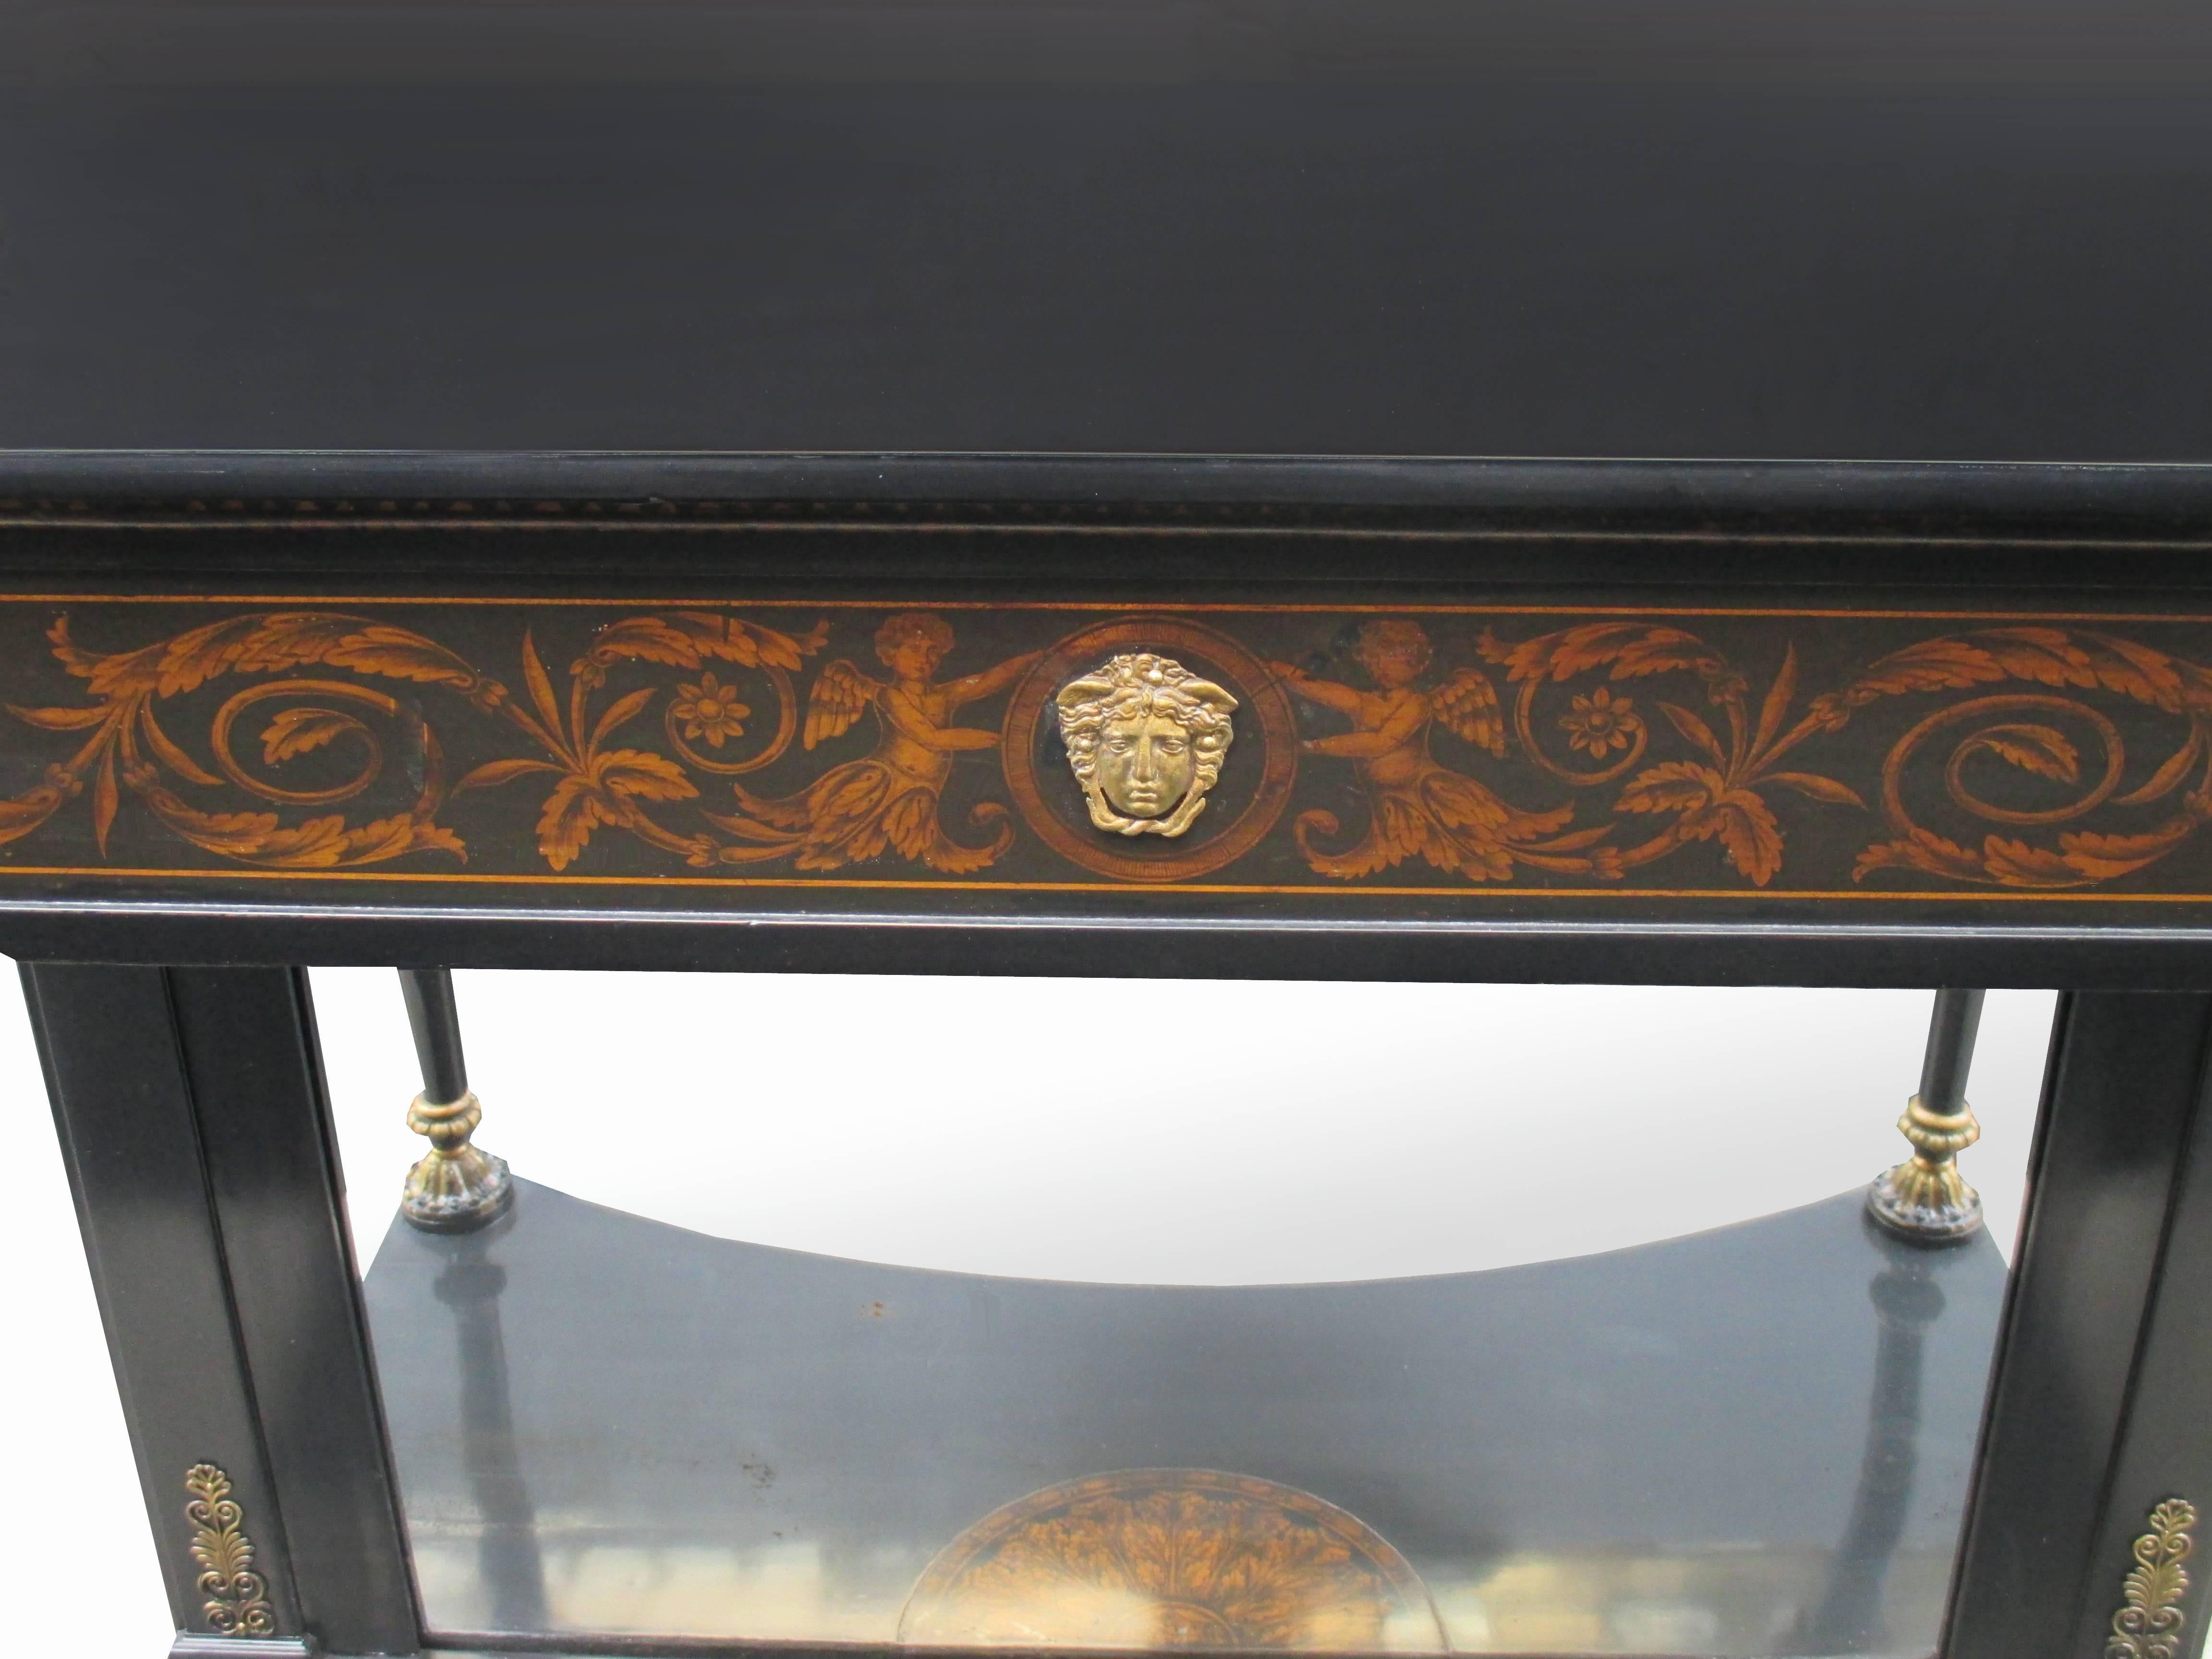 A fine ebonized Empire colsole.
Ebonized pearwood with fine penwork details,
carved giltwood details, and mirrored back panel.

Full restoration by Karl Kemp antiques.